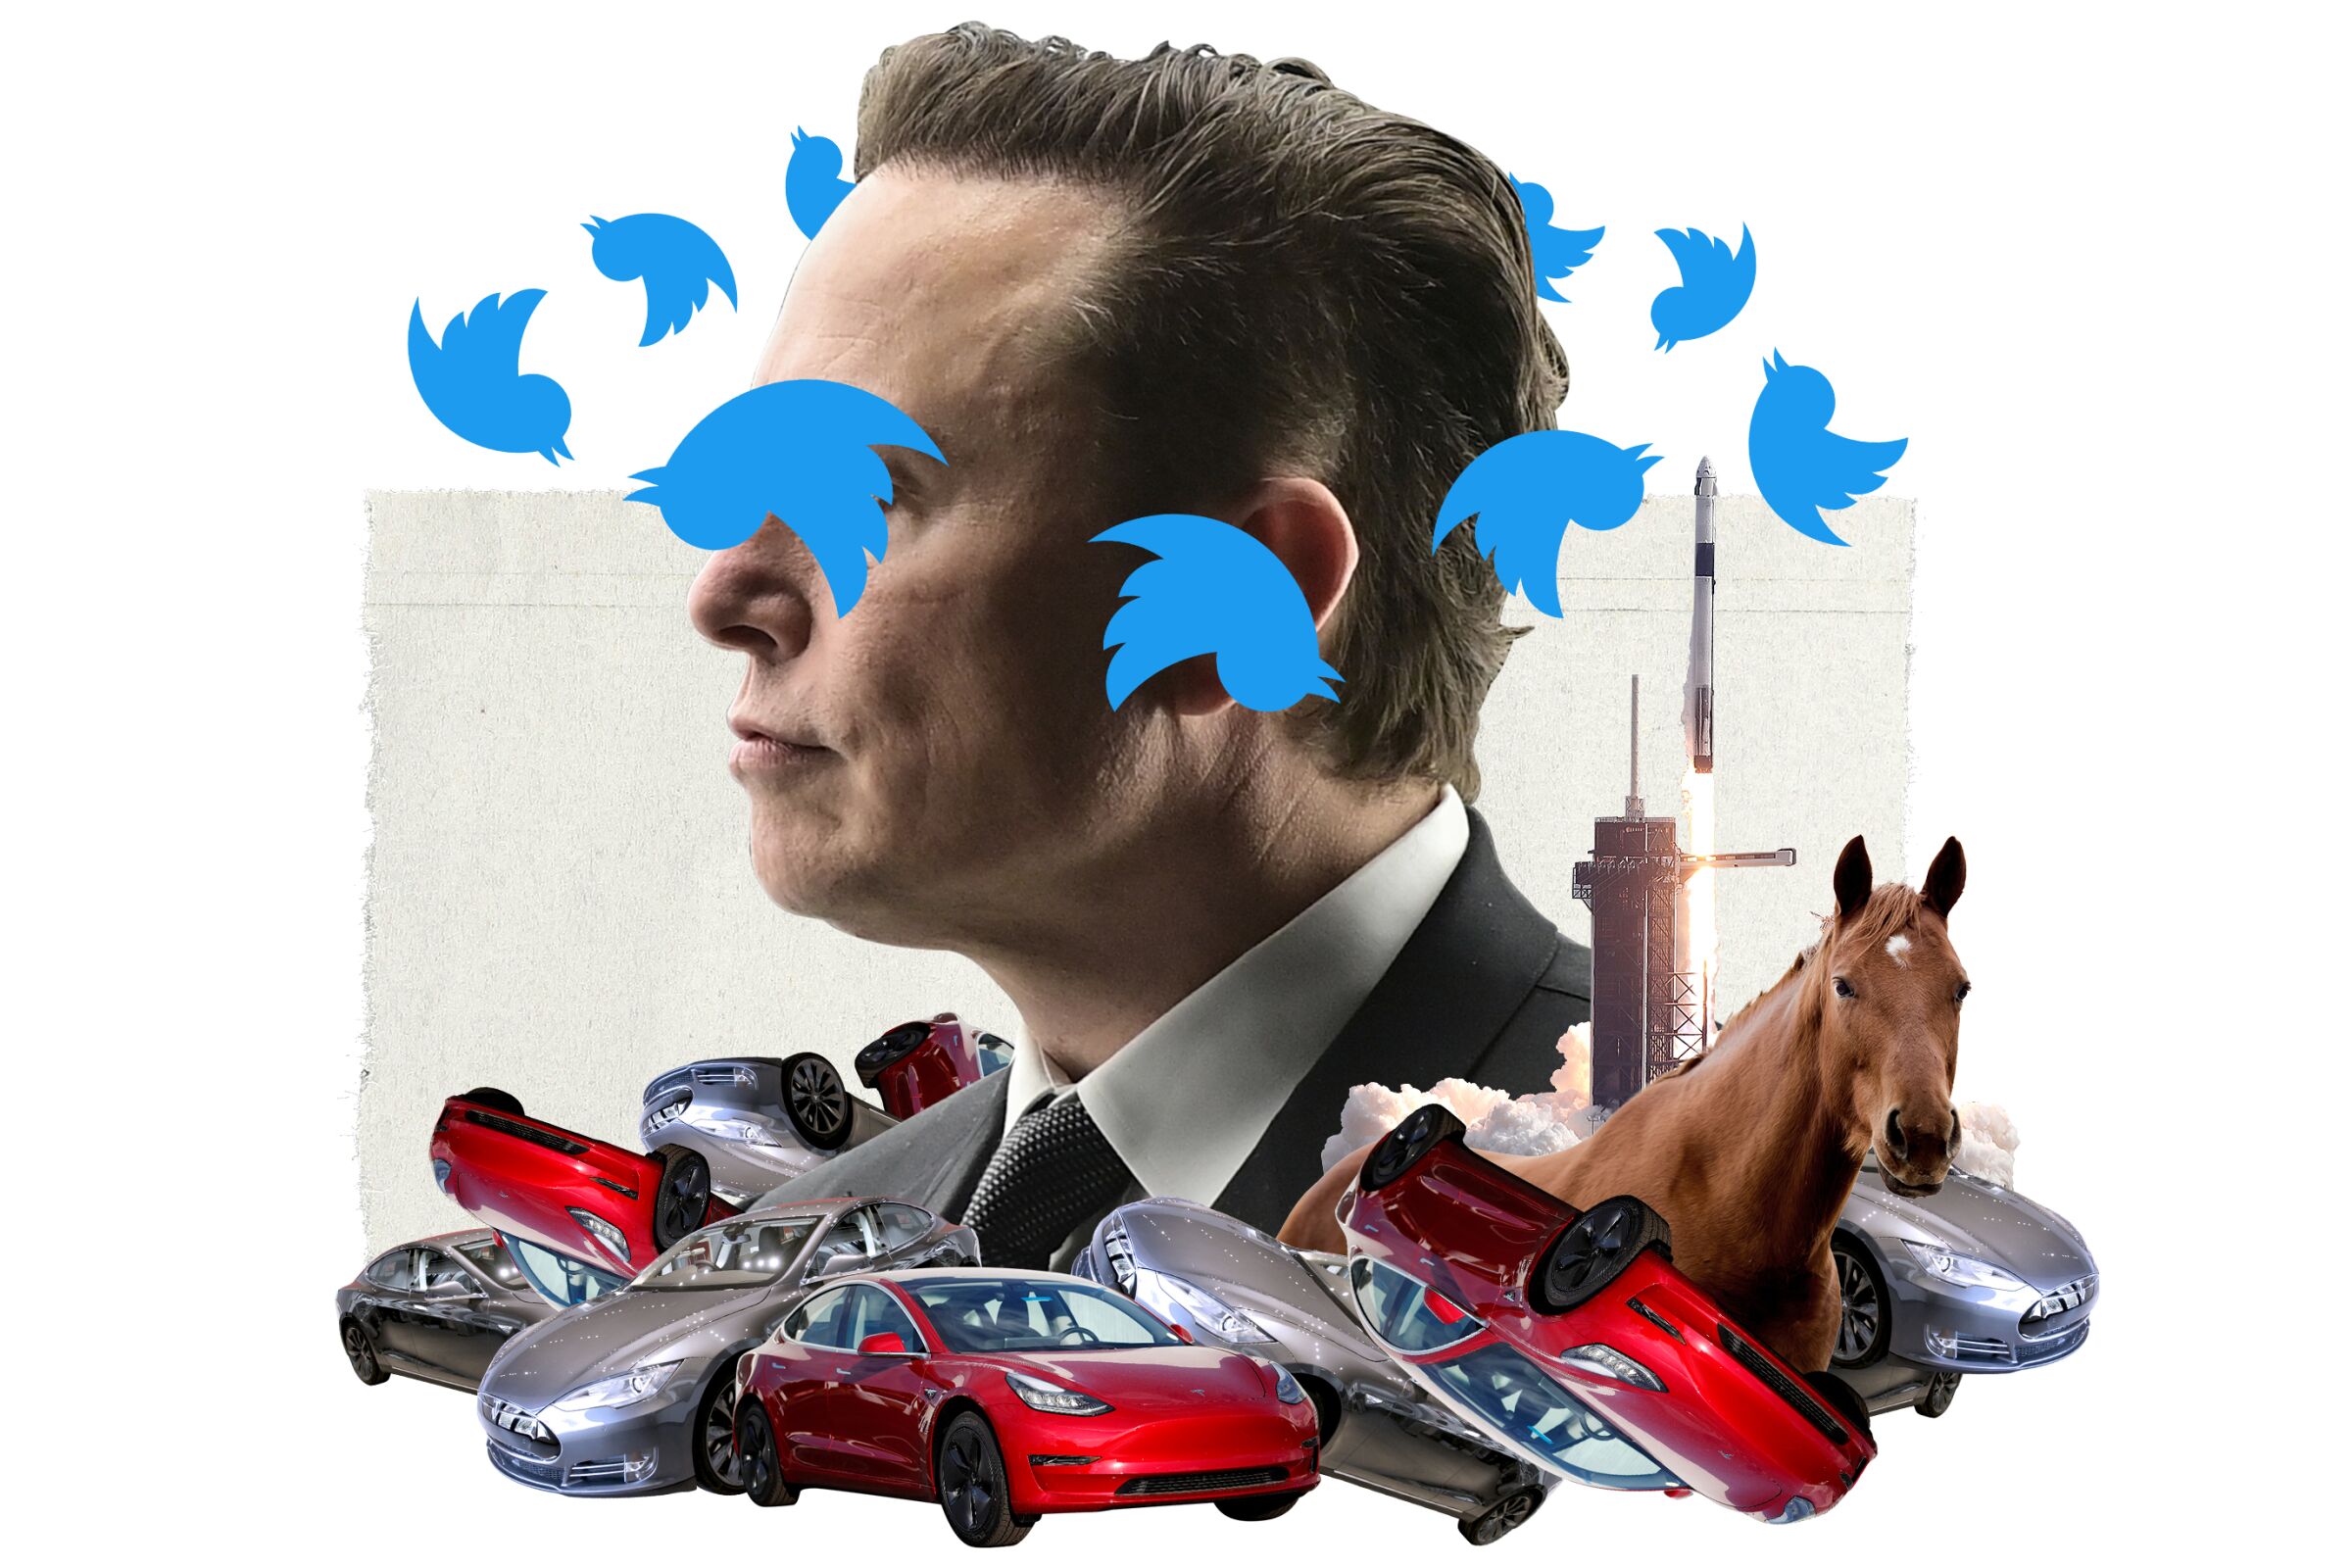 photo illustration of Elon Musk surrounded by twitter birds, tesla cars, a spacex rocket, and a horse.